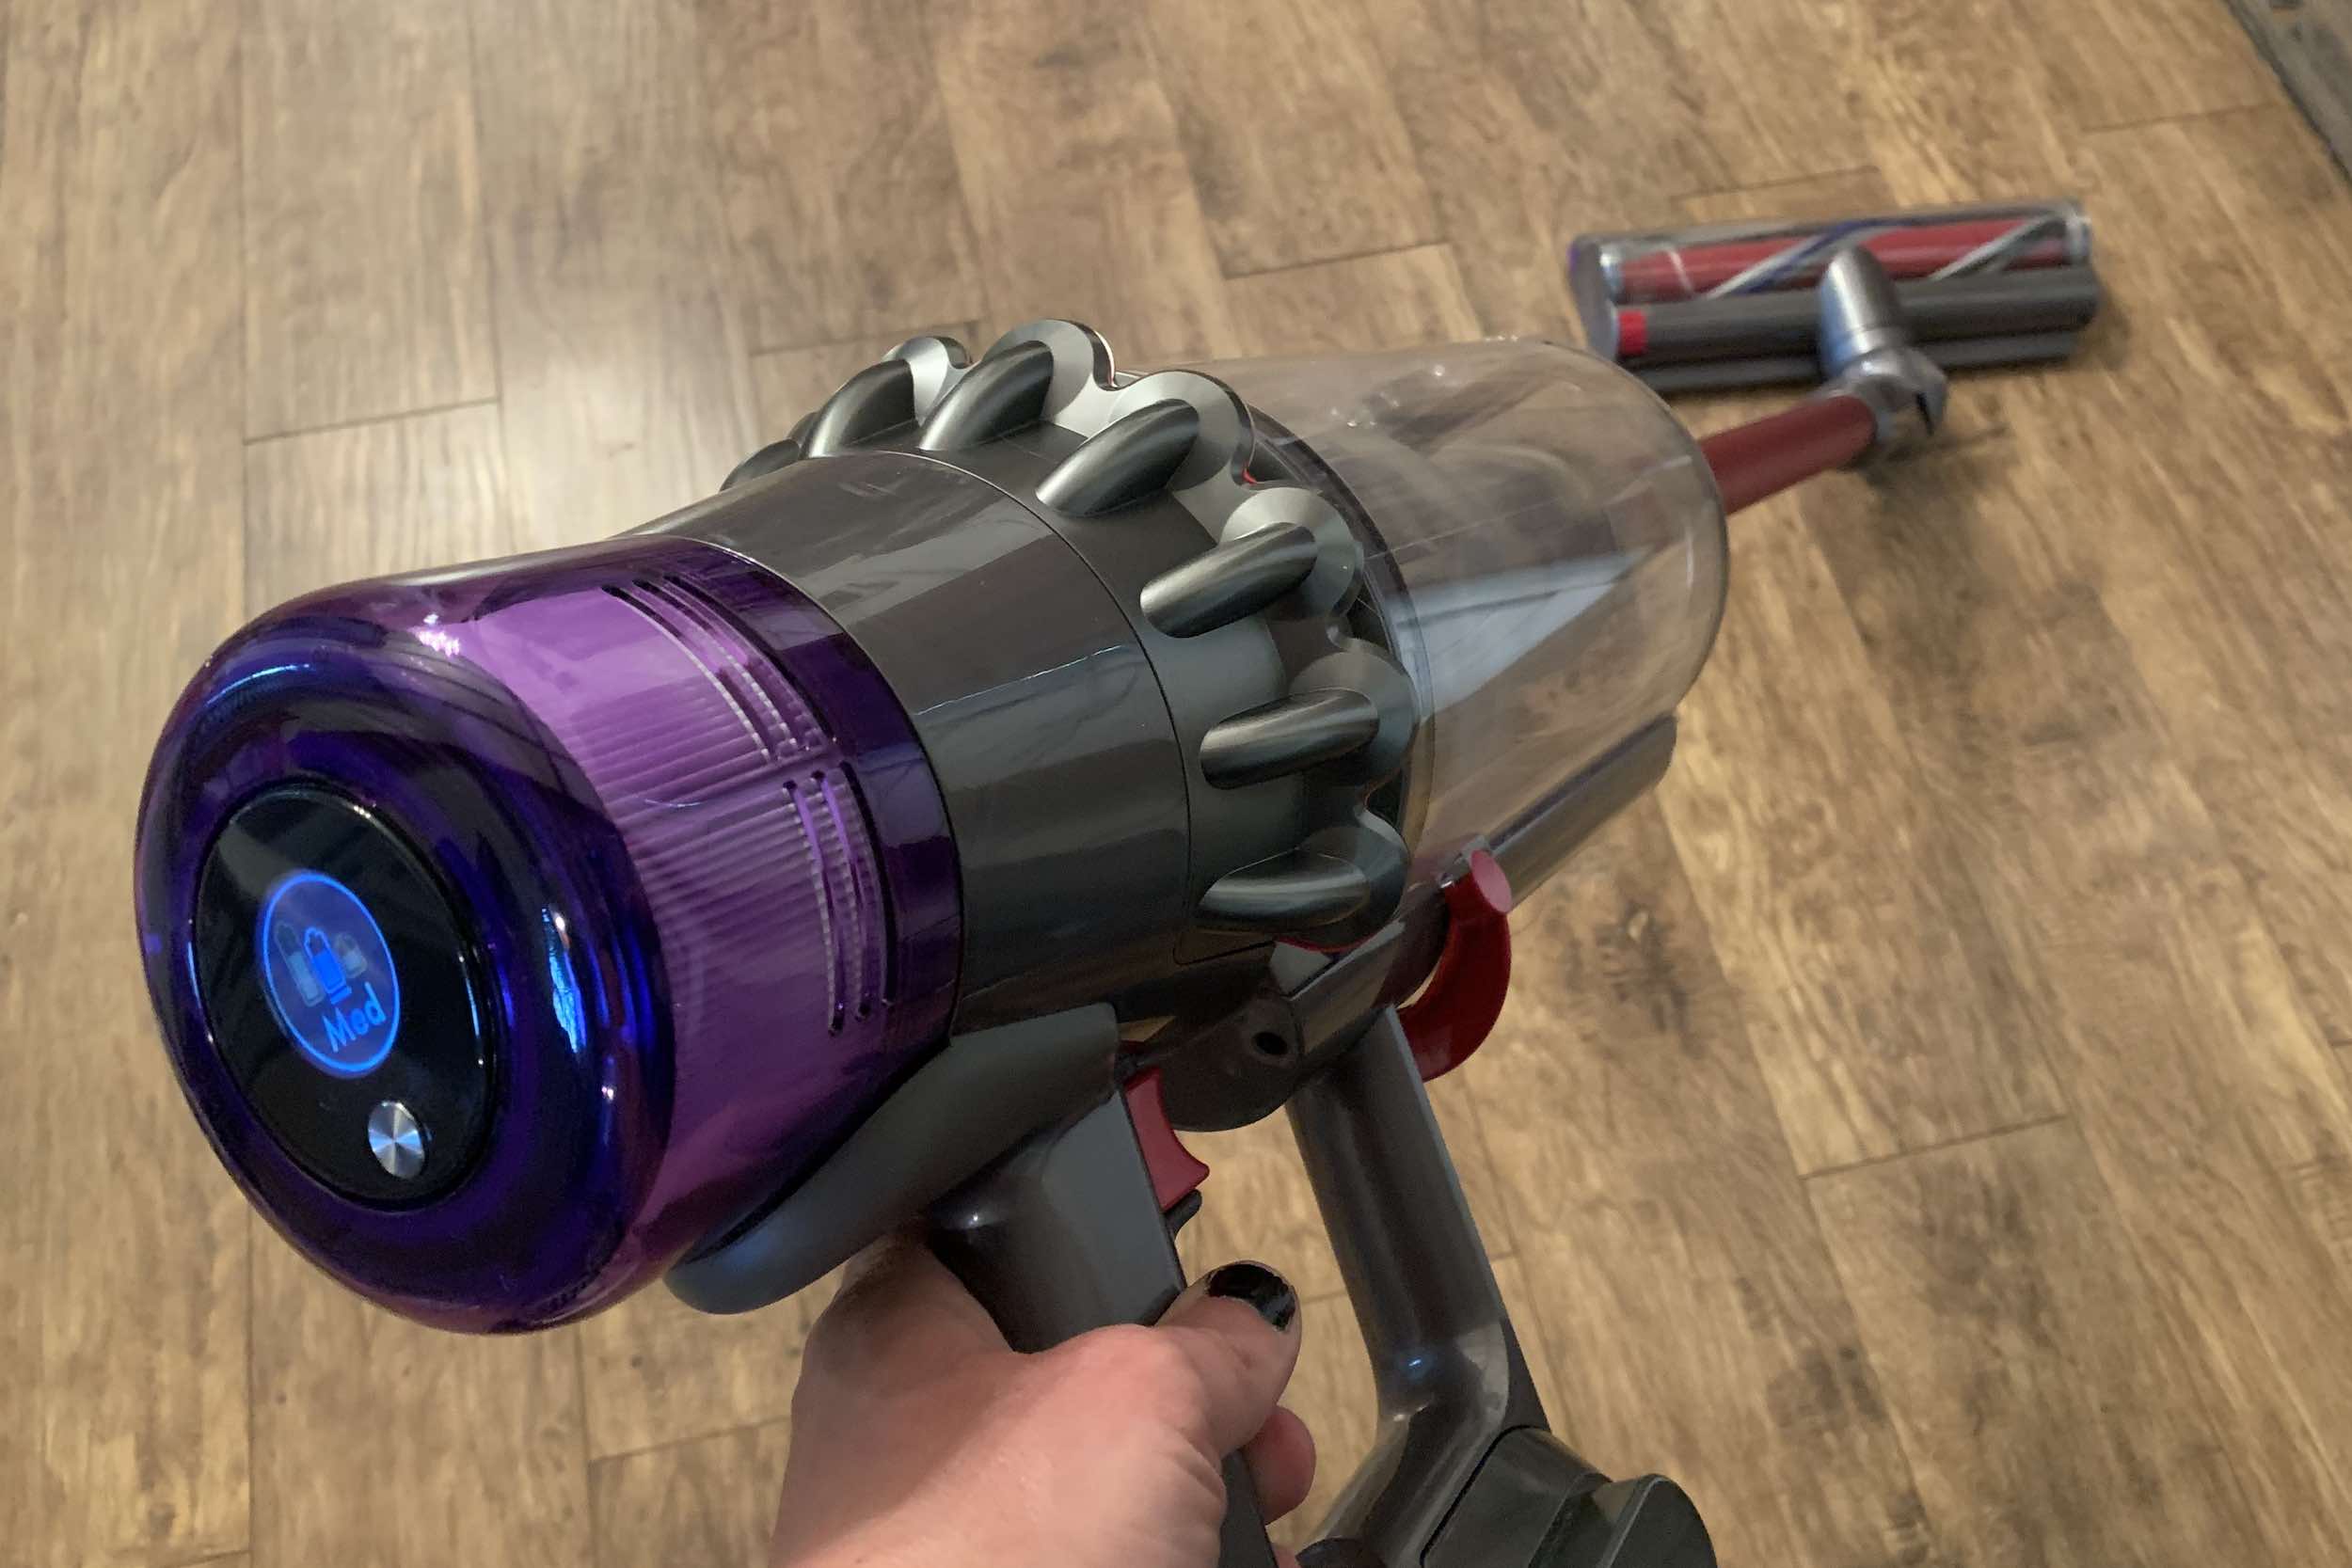 Dyson V11 Outsize Cordless Stick Vacuum demo and review